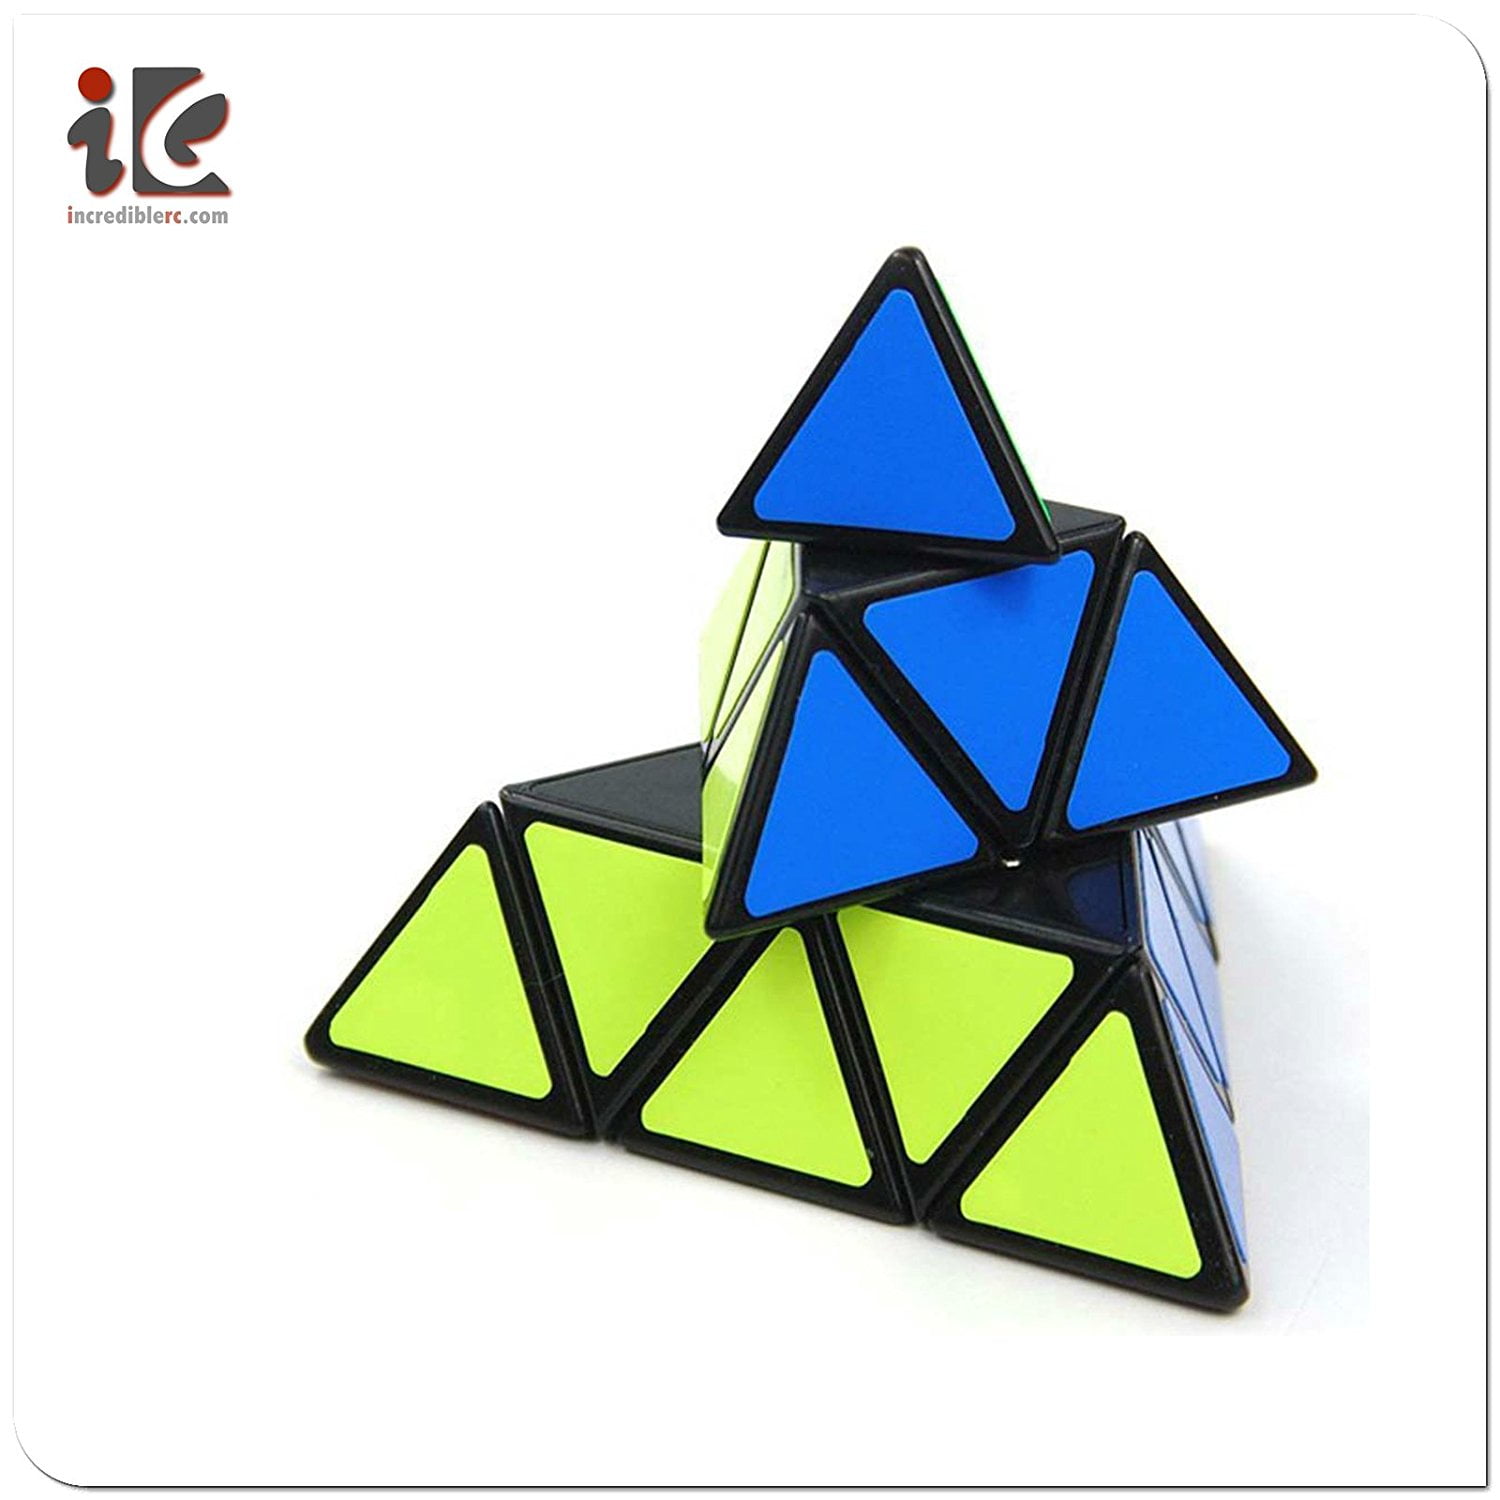 Pyramid Cube 3x3 Triangle Magic Cube Puzzle Gift for Kids and Adults,3 Colors